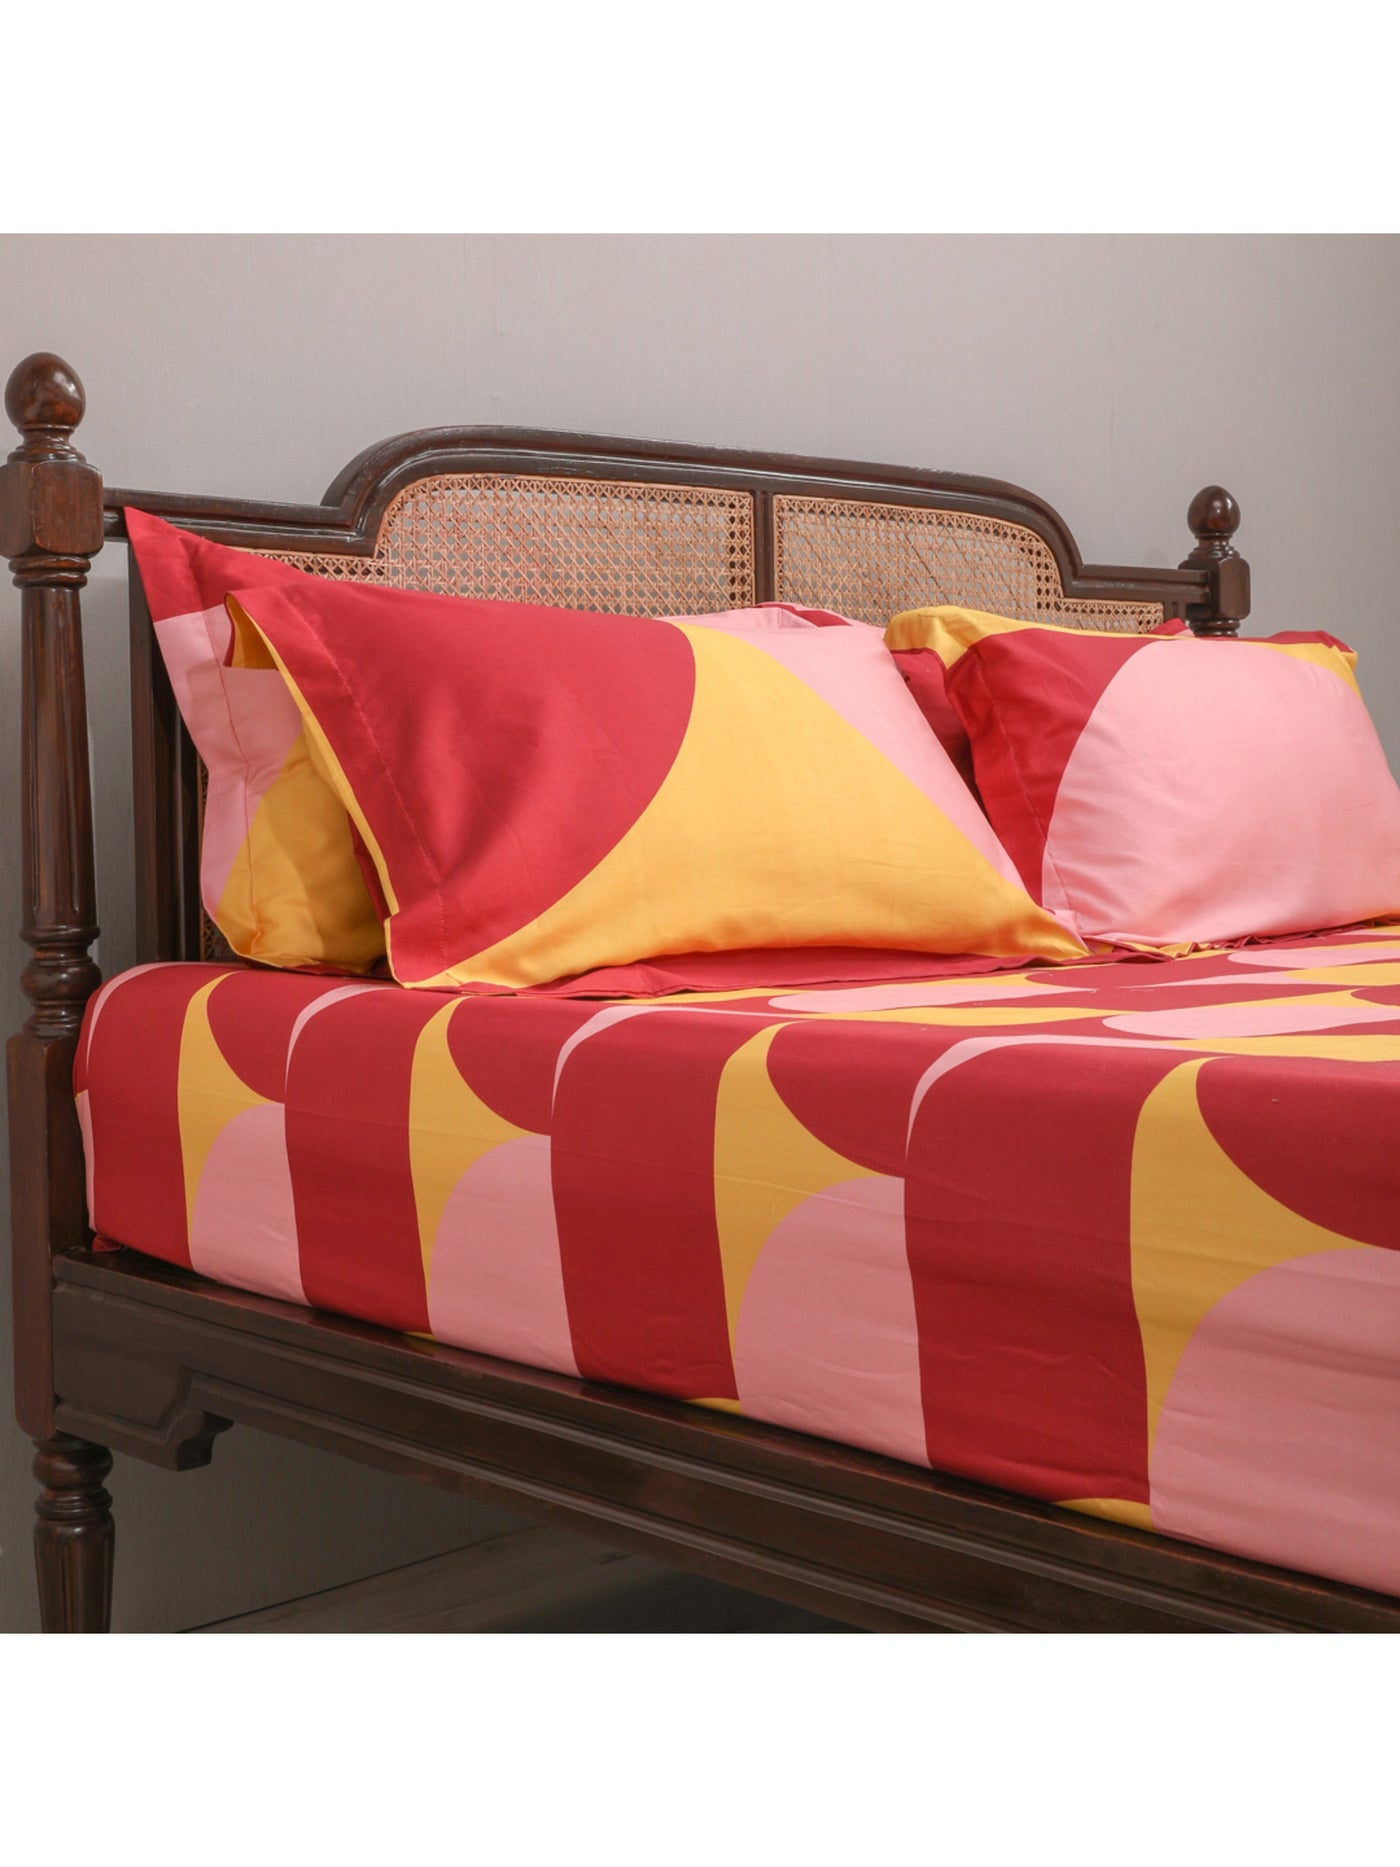 Bedsheet - The Echo In Hot Red